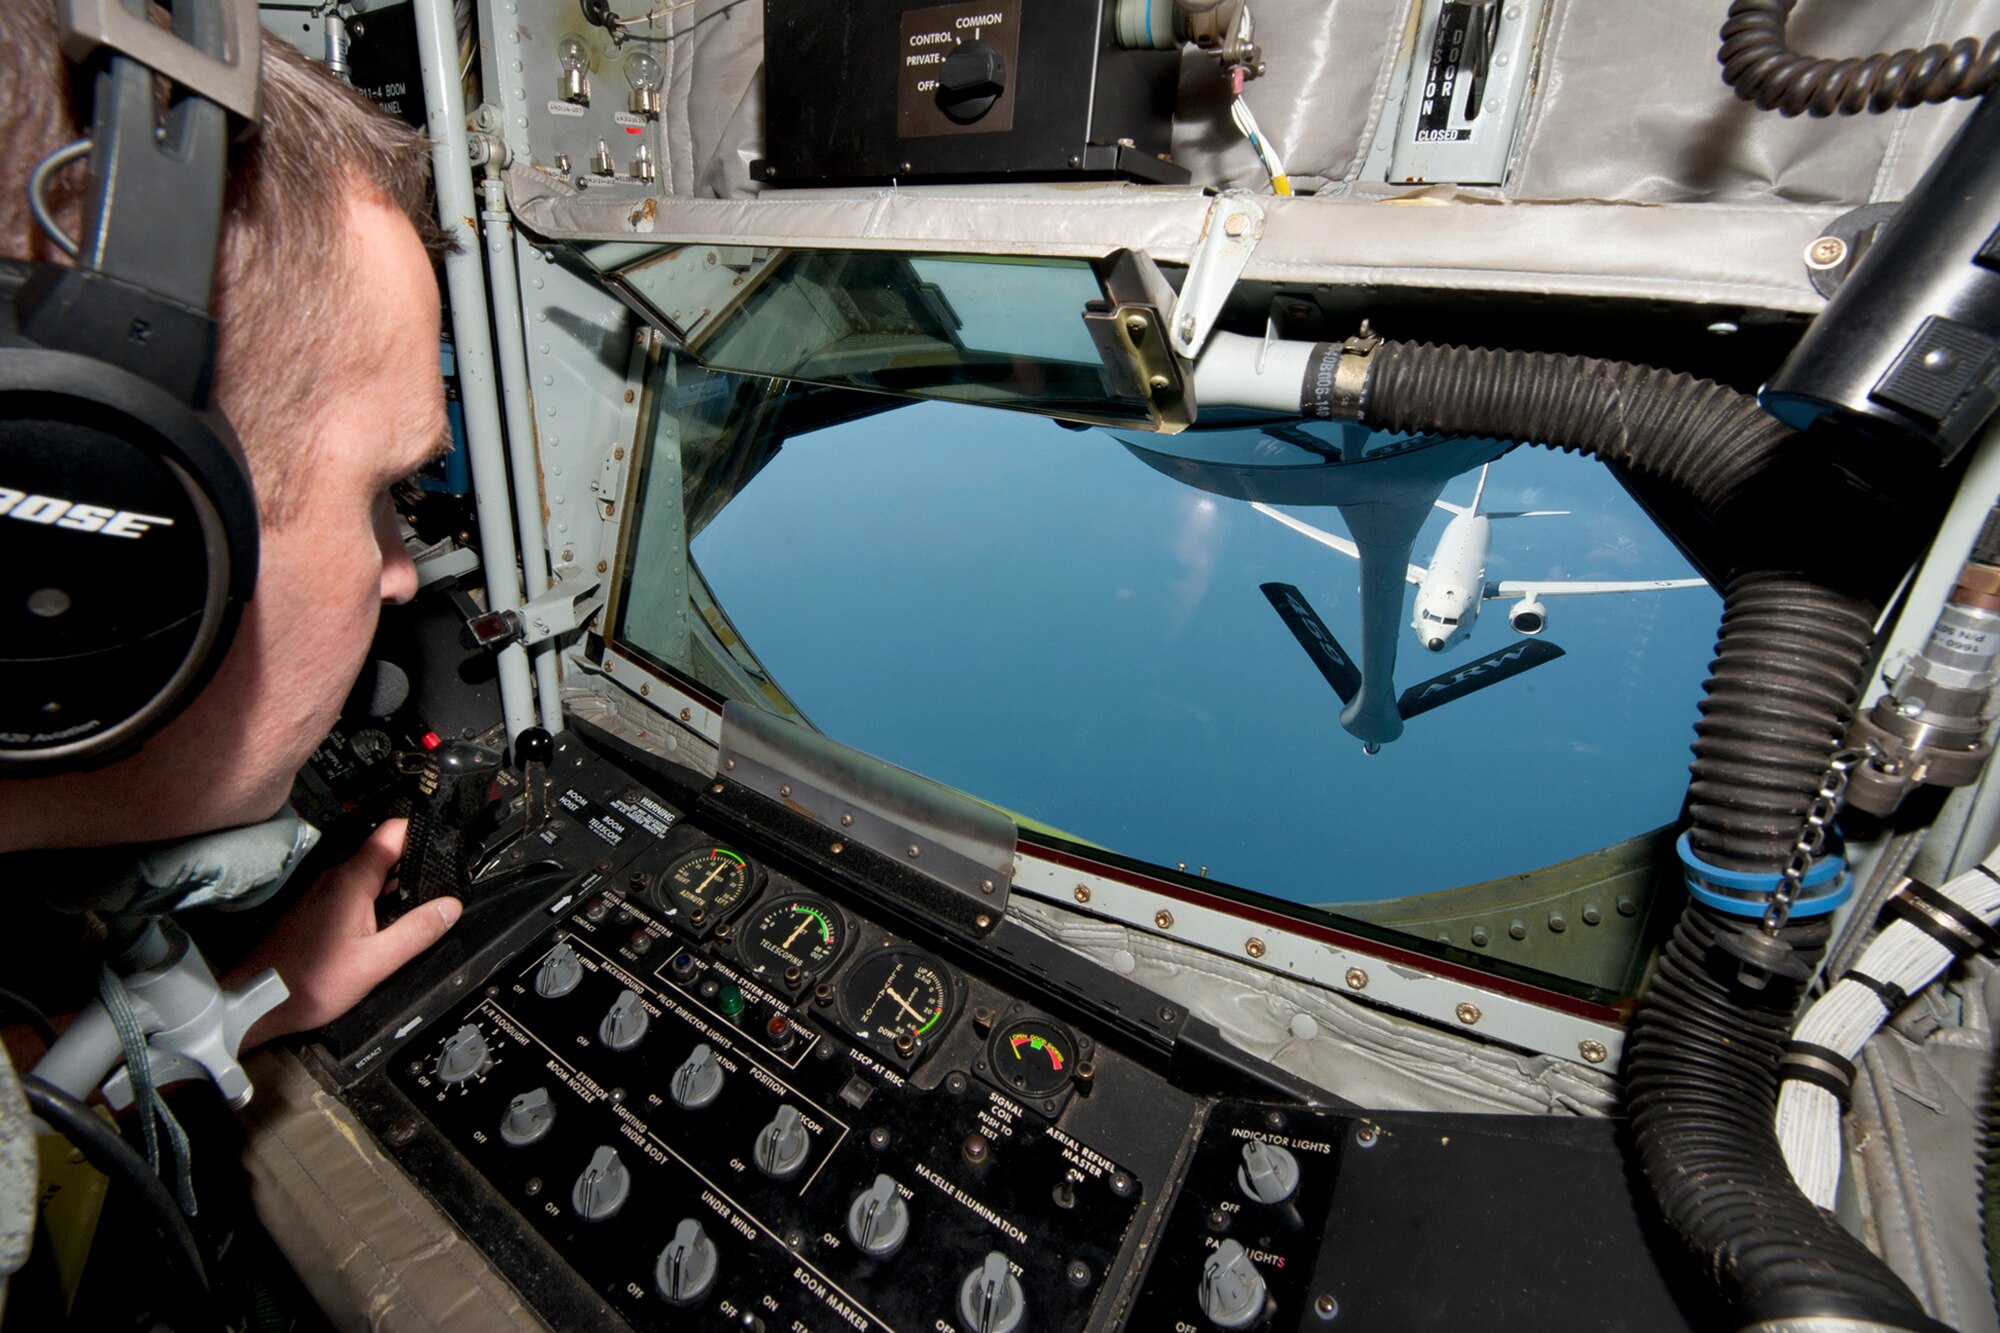 Tech. Sgt. Steve Hood, 756th Air Refueling Squadron boom operator, watches as a Naval Air Systems Command P-8A Poseidon comes in on approach for an inflight refueling over the Atlantic Ocean April 13, 2017. This was the first inflight refueling of the P-8A after a year of planning with NAVAIR. The P-8A is only the second-ever Navy aircraft to be fitted with a receiver for aerial refueling; the first being the E-6B Mercury nearly 30 years ago. (U.S. Air Force photo/Tech. Sgt. Kat Justen)